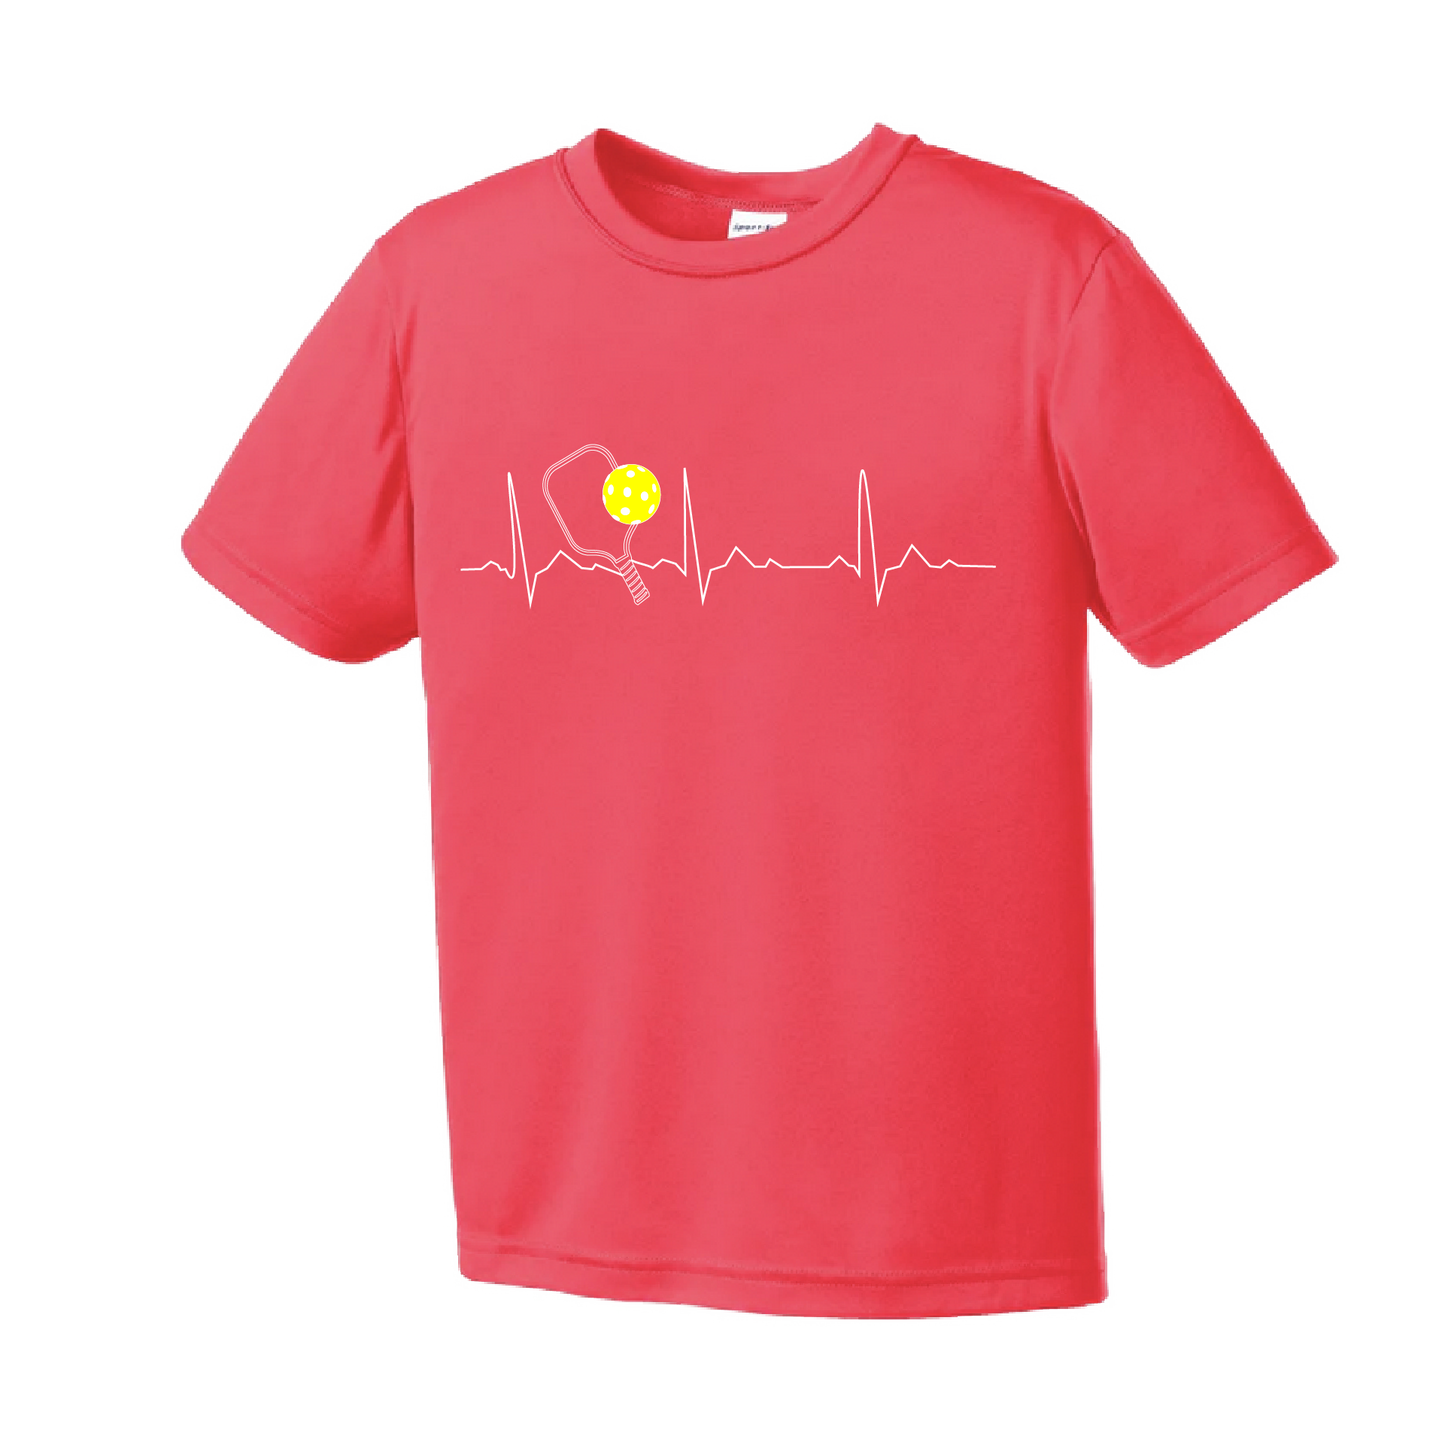 Pickleball Design: Heartbeat  Youth Styles: Short Sleeve  Shirts are lightweight, roomy and highly breathable. These moisture-wicking shirts are designed for athletic performance. They feature PosiCharge technology to lock in color and prevent logos from fading. Removable tag and set-in sleeves for comfort.